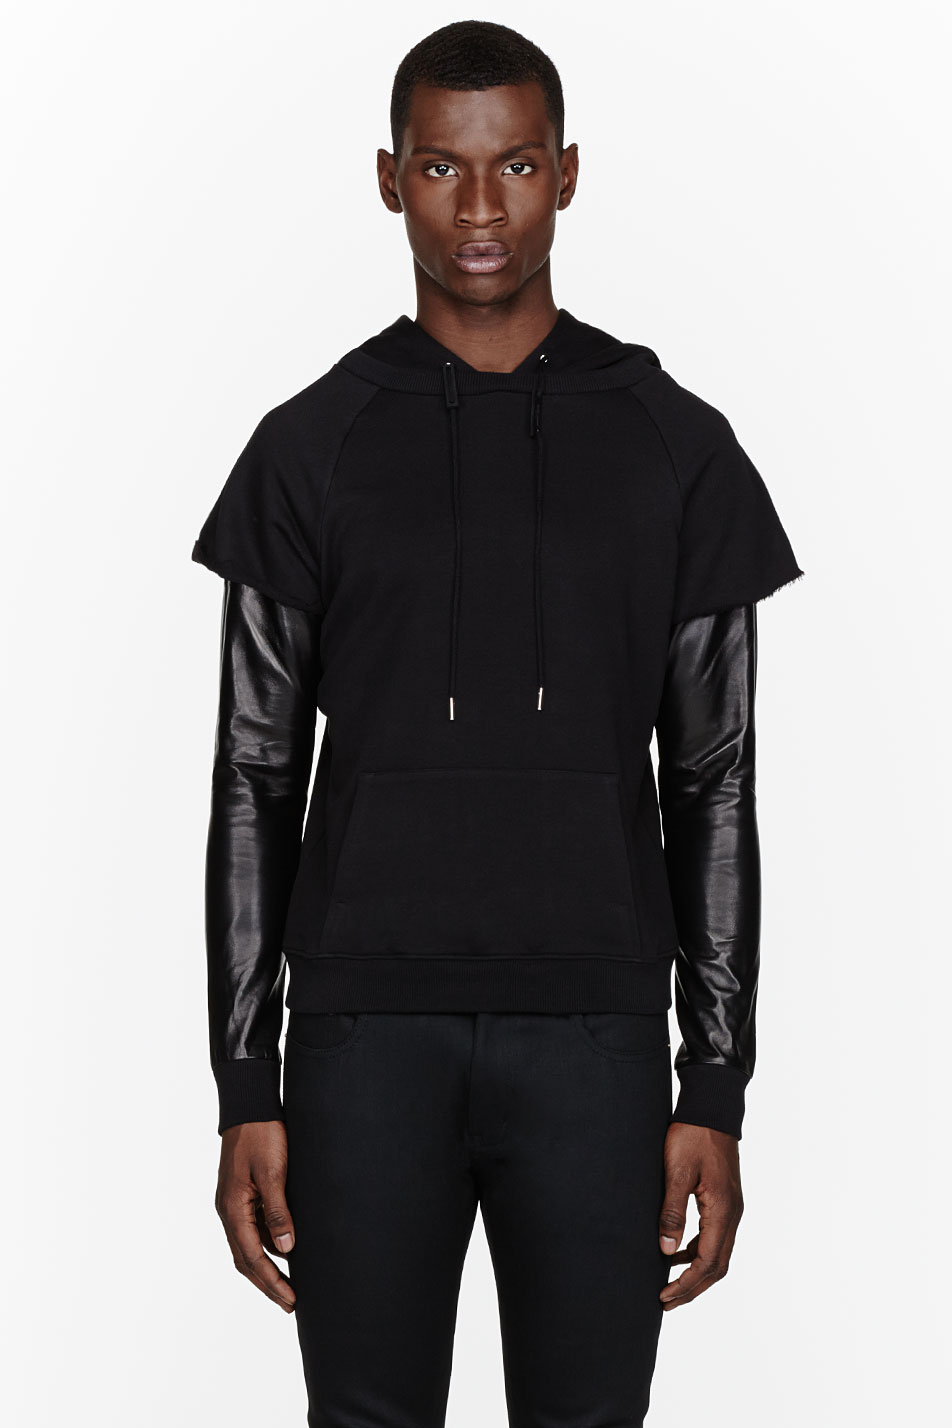 Lyst - Saint Laurent Black Leather and Cotton Layered Hoodie in Black ...